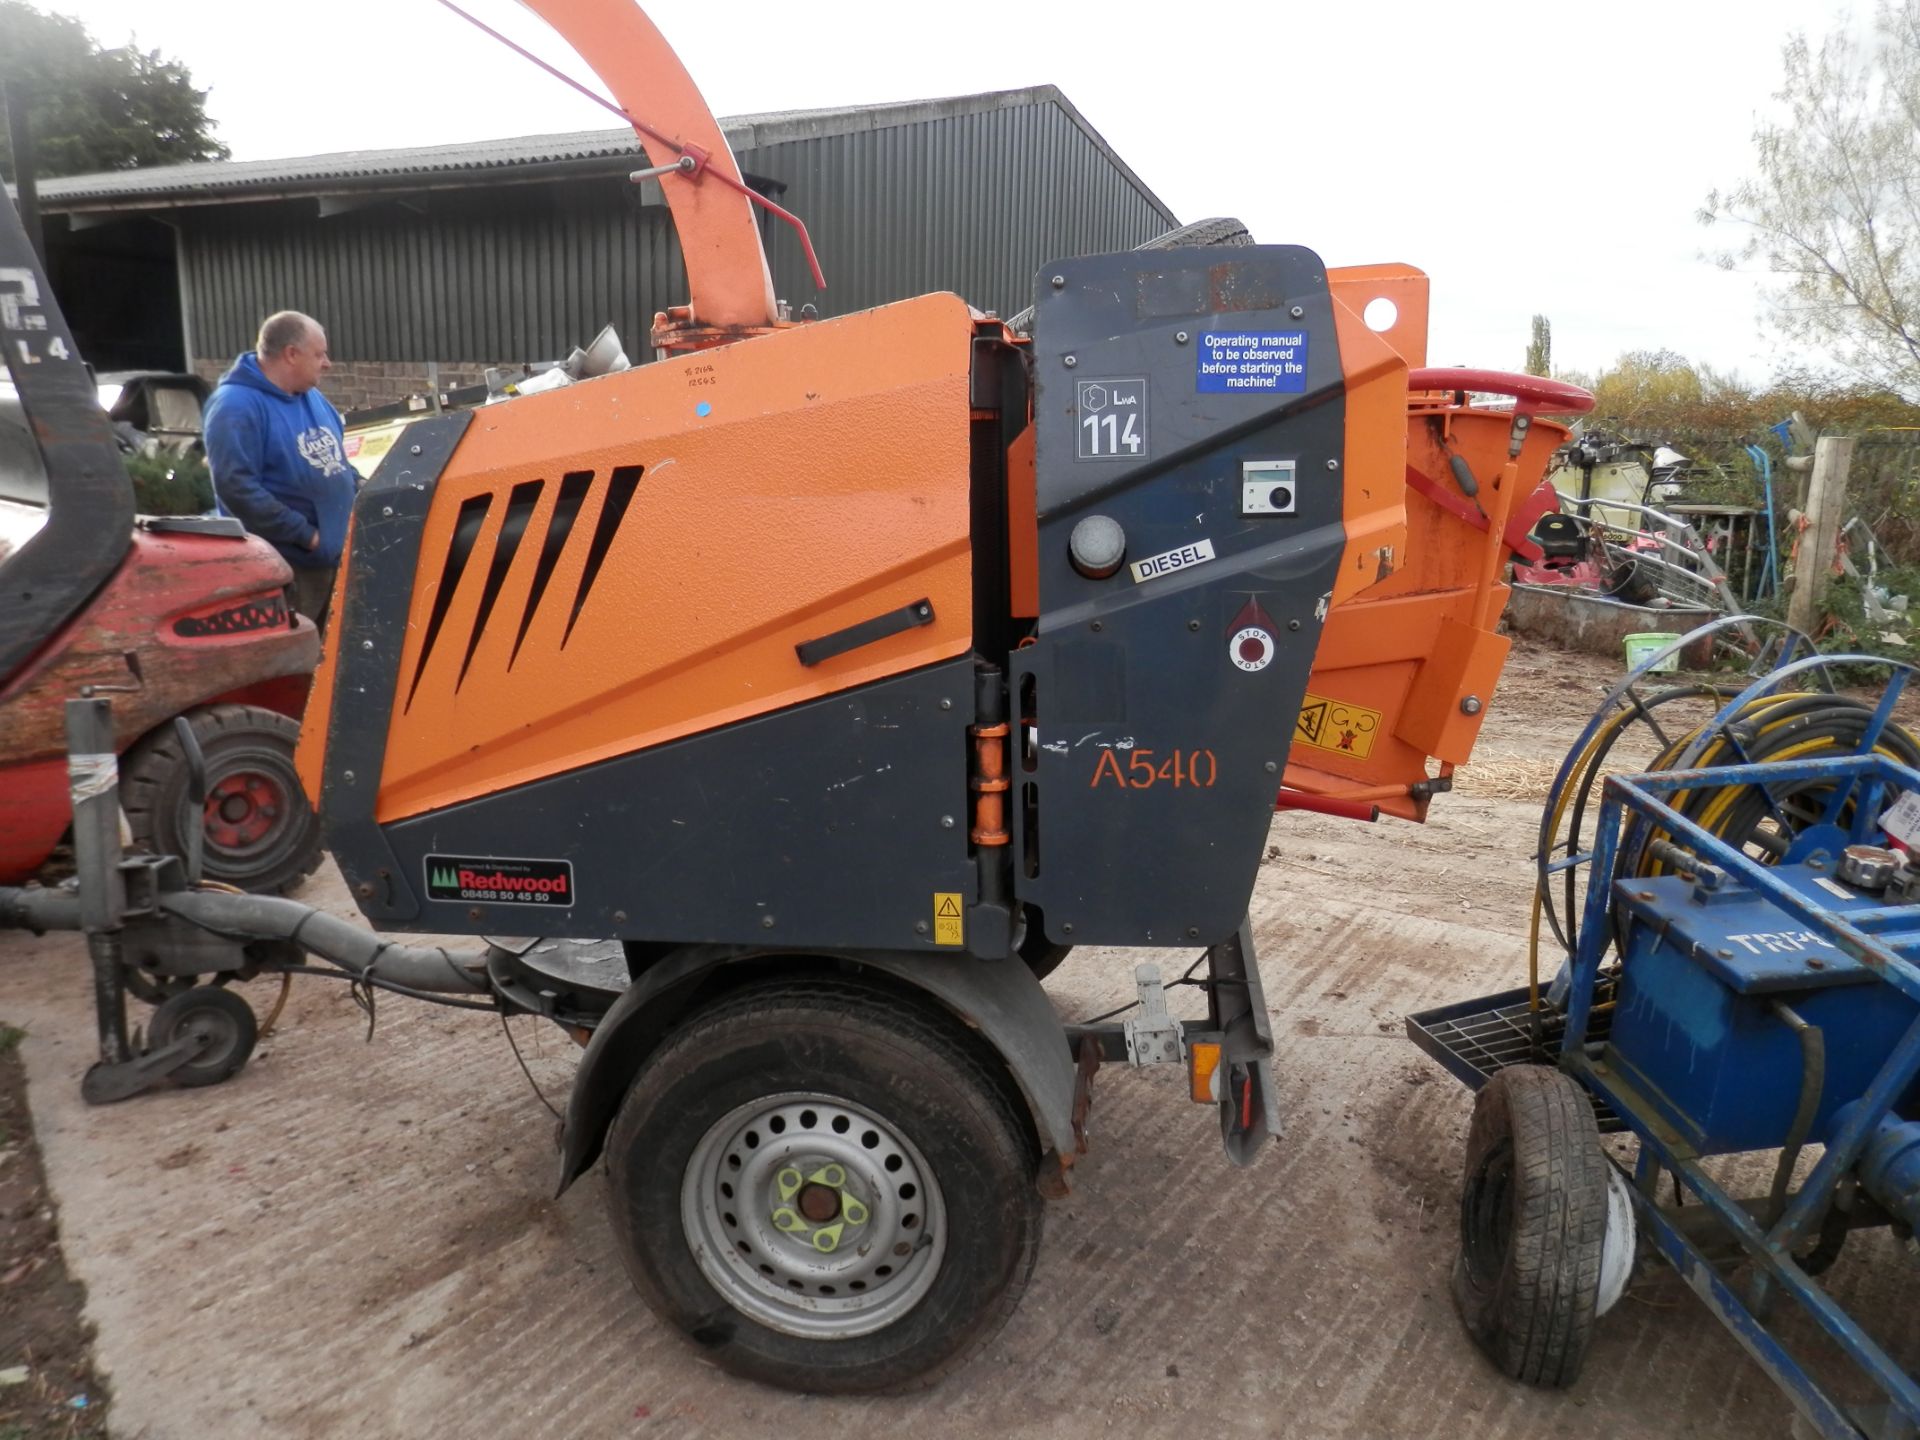 2011 LARGE JENSEN A540 TURNTABLE CHIPPER UNIT,TRAILERED. - Image 2 of 4